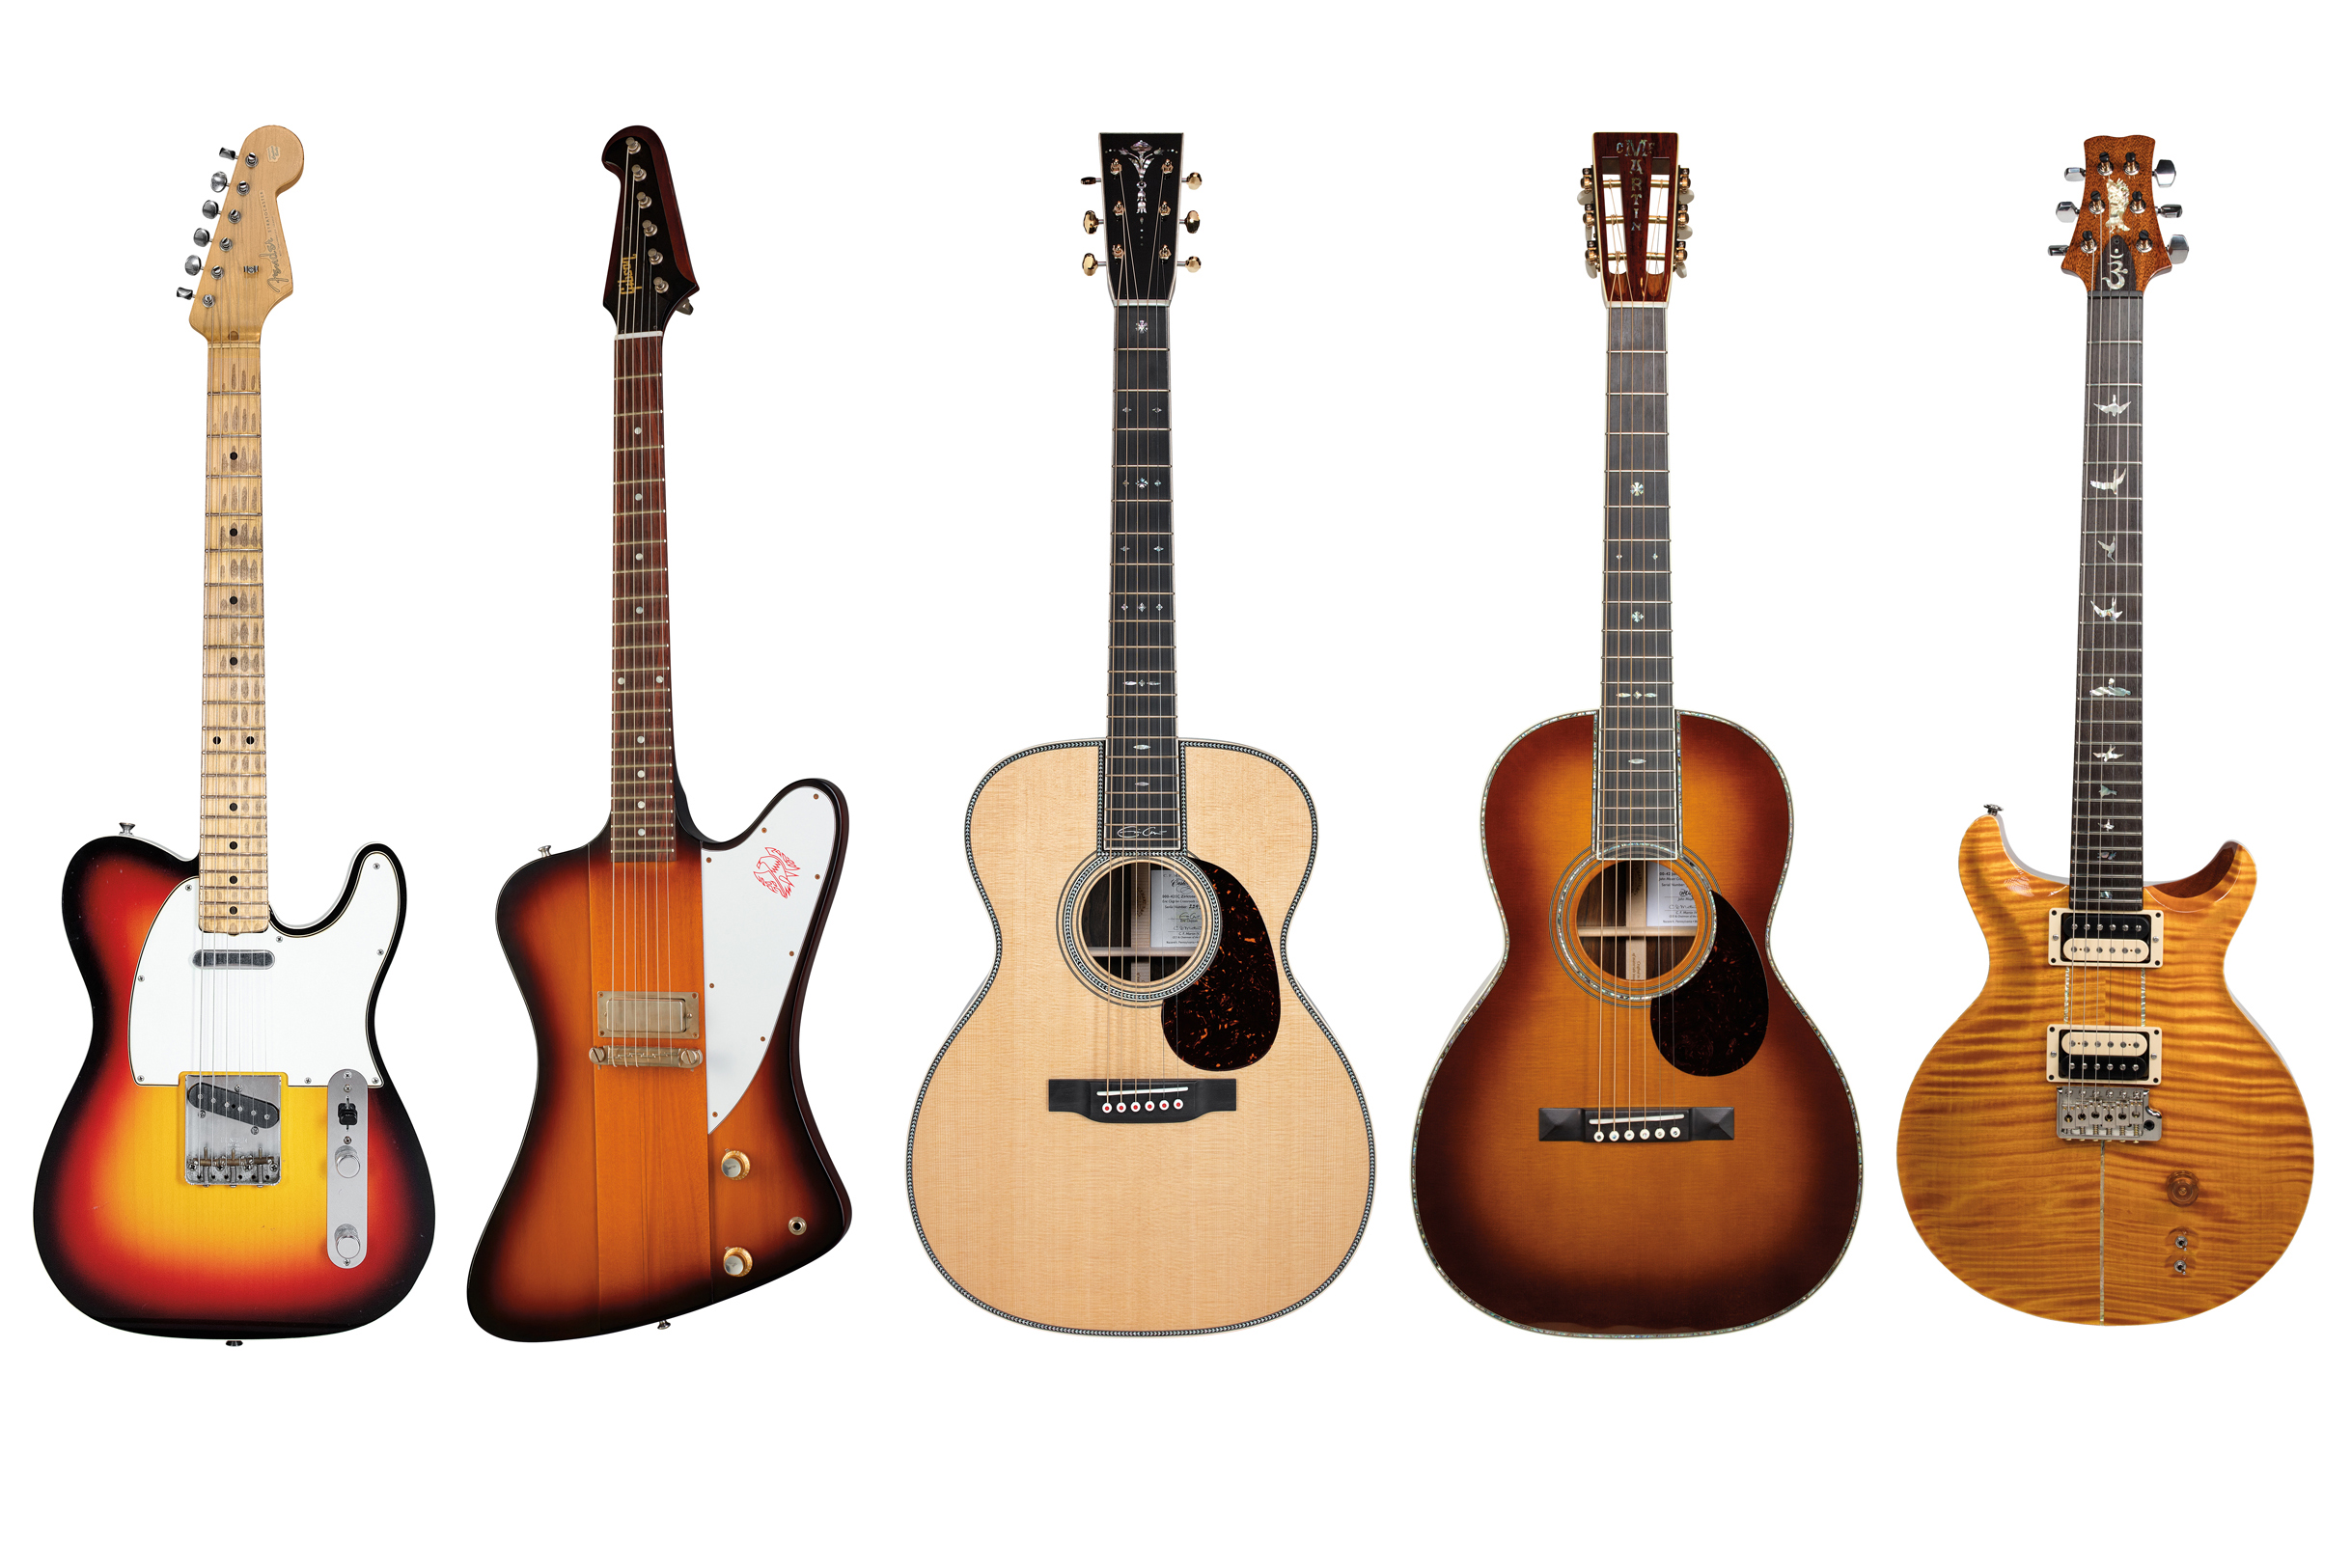 2019 Crossroads Guitar Collection